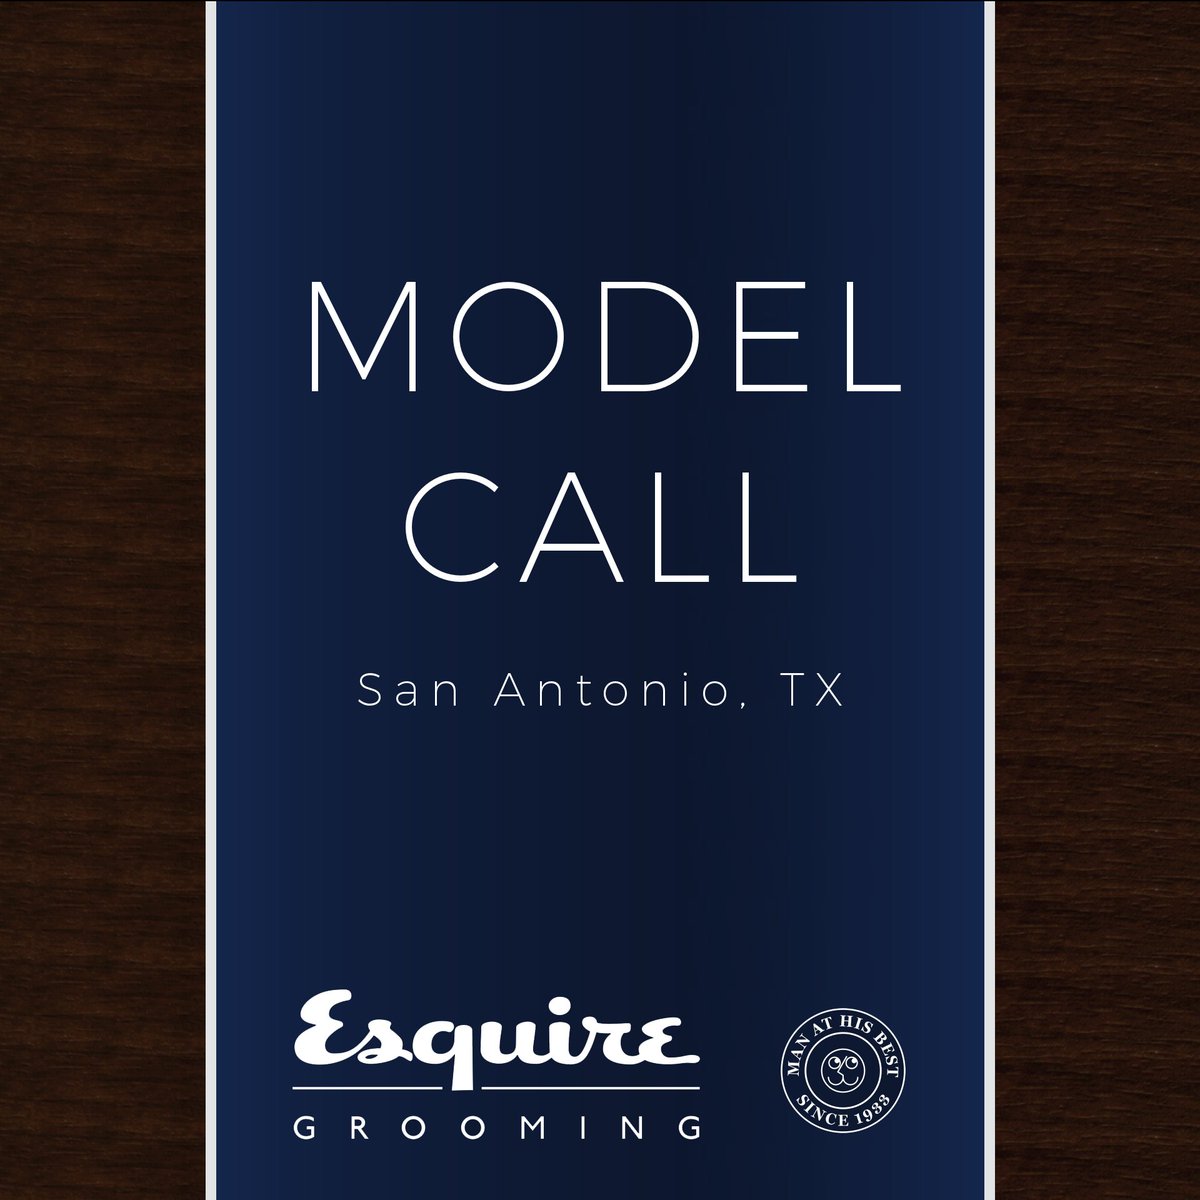 Esquire Grooming Model Call. Men 18+. Details can be found at bit.ly/2xsKuVZ #esquiregrooming #modelcall #malemodels